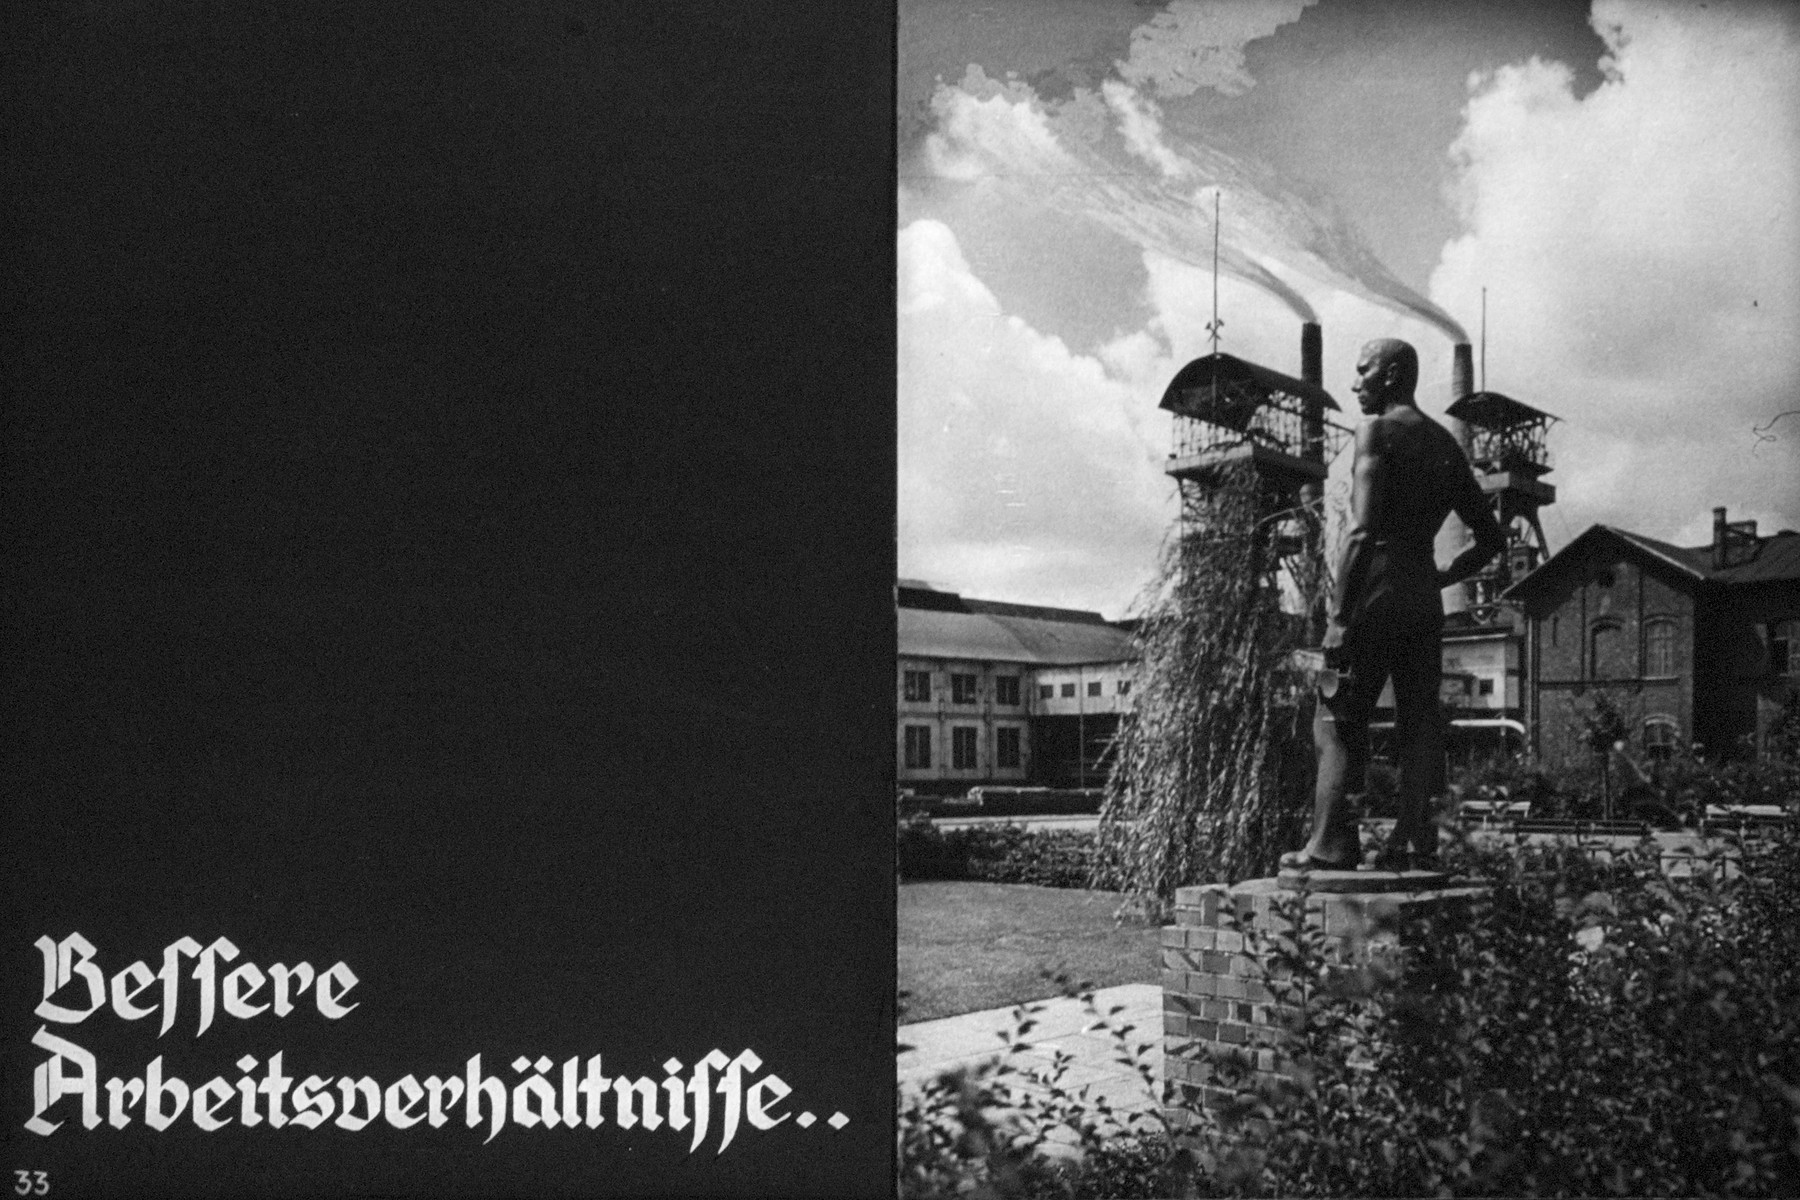 34th Nazi propaganda slide from Hitler Youth educational material titled "Border Land Upper Silesia."

Bessere Arbeitsverhältnisse...
//
Better working conditions ...